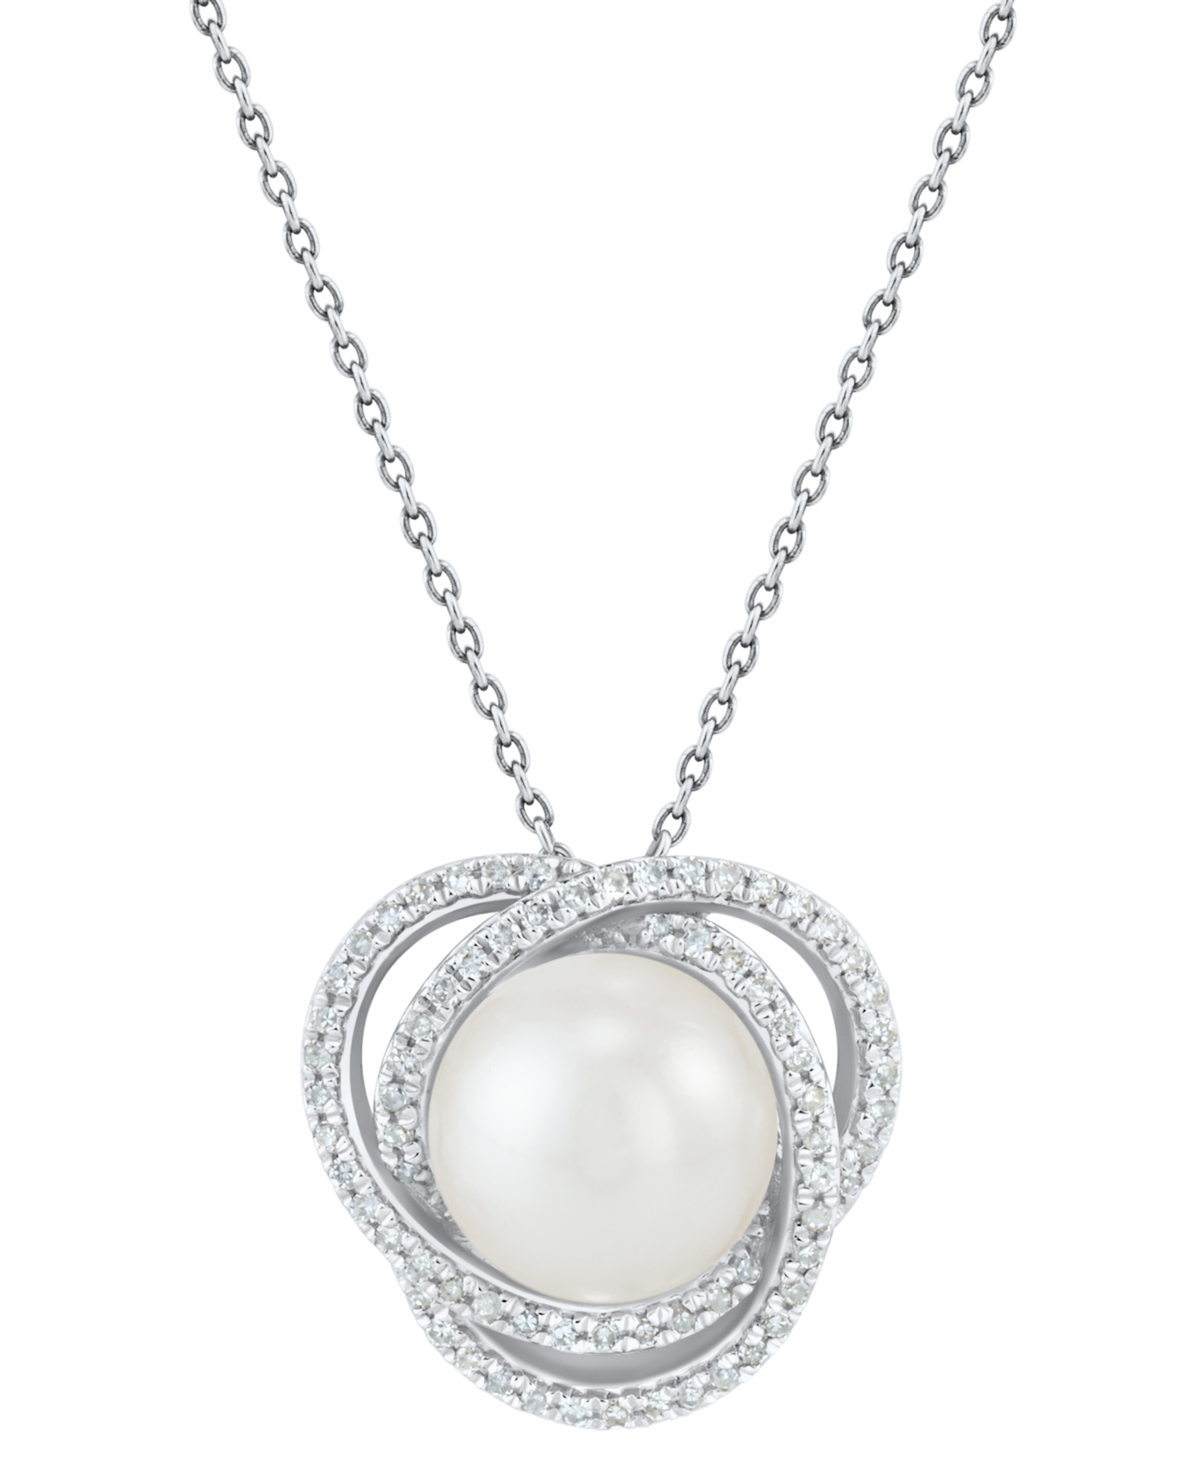 Cultured Freshwater Pearl (8mm) & Diamond (1/6 ct. t.w.) Love Knot Pendant Necklace in 14k White Gold, 16" + 2" extender - White Gold